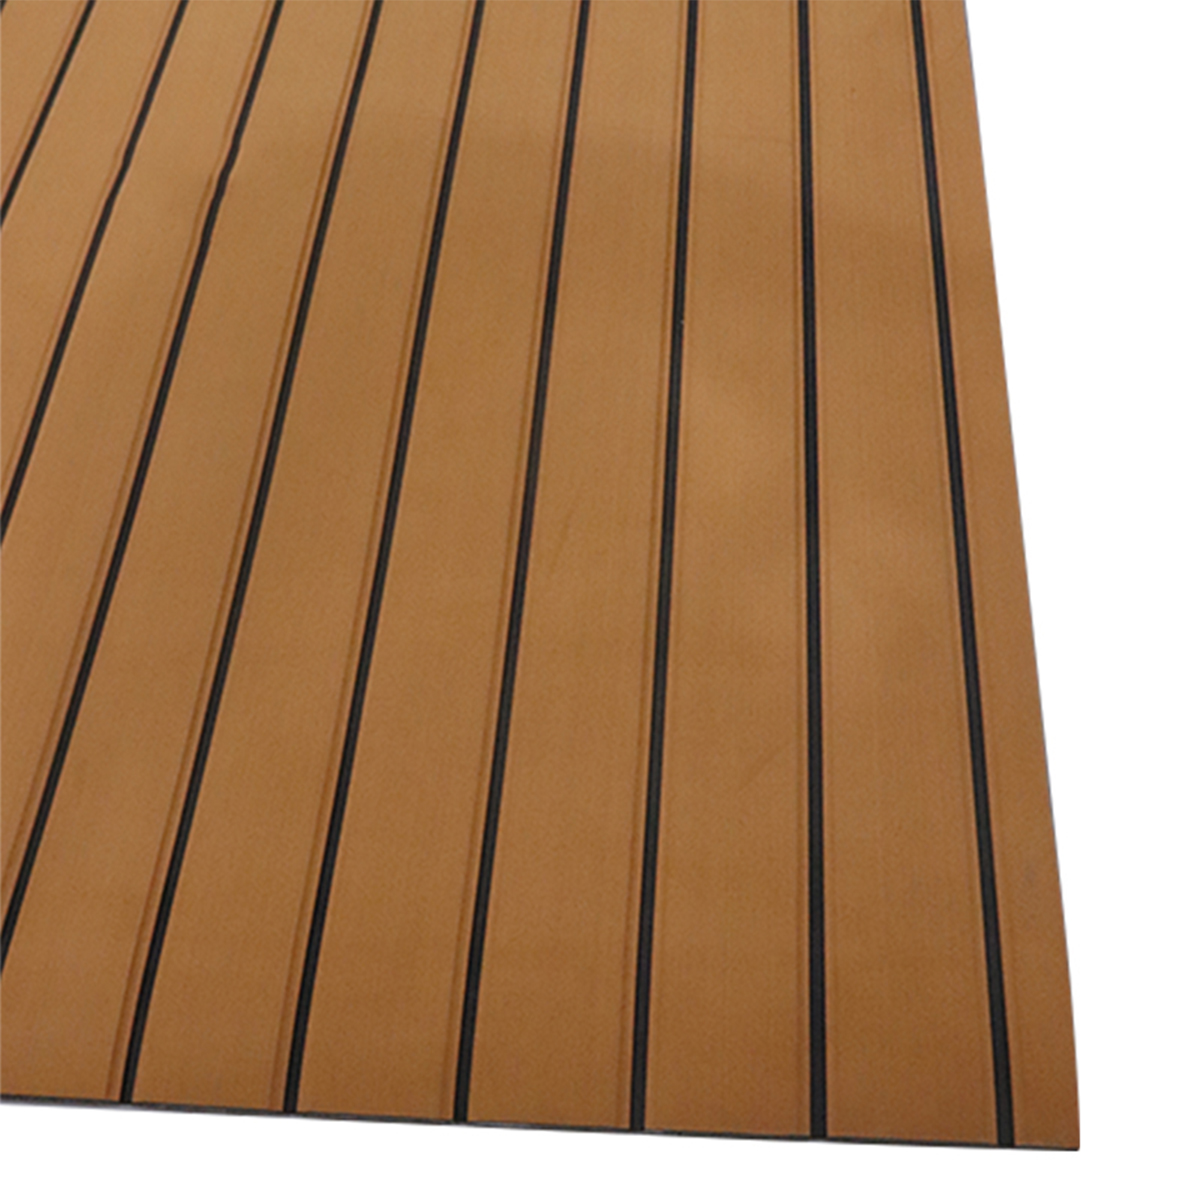 Find 450x2400x5mm Marine Flooring Faux Teak Self Adhesive EVA Teak Decking Sheet for Sale on Gipsybee.com with cryptocurrencies